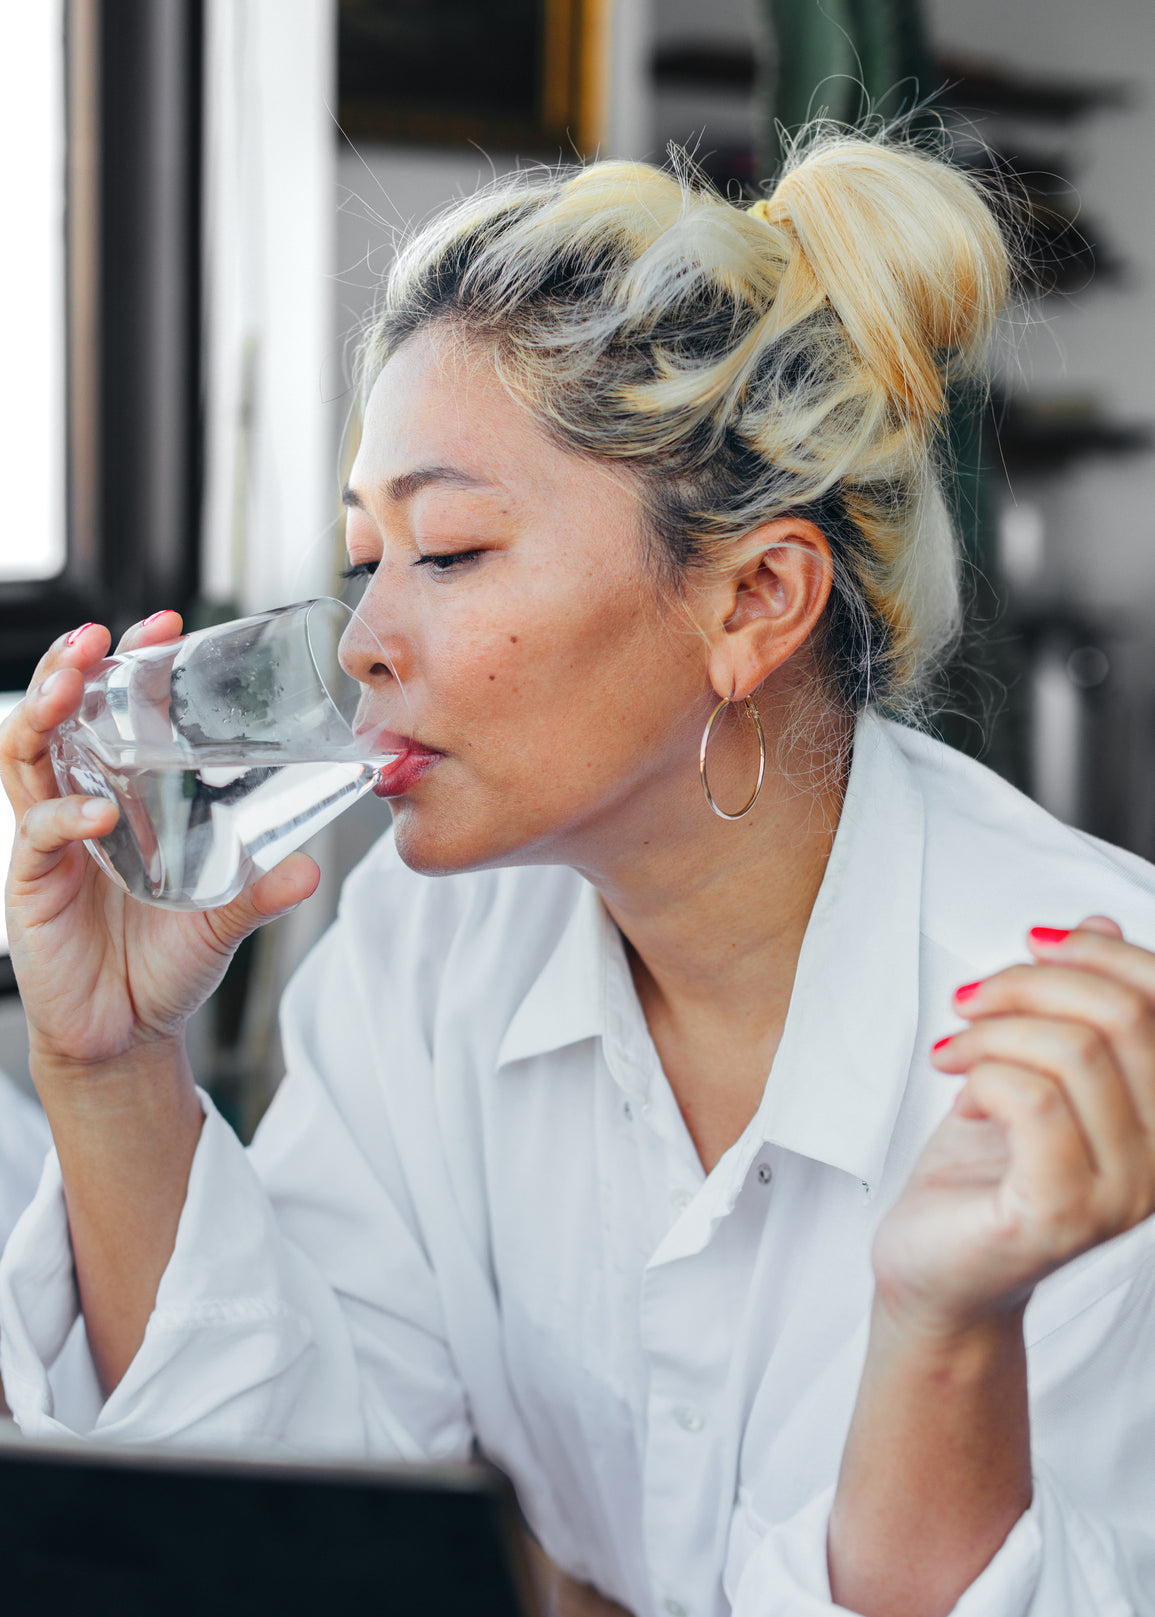 Do You Really Need To Drink Two Litres Of Water A Day? New Study